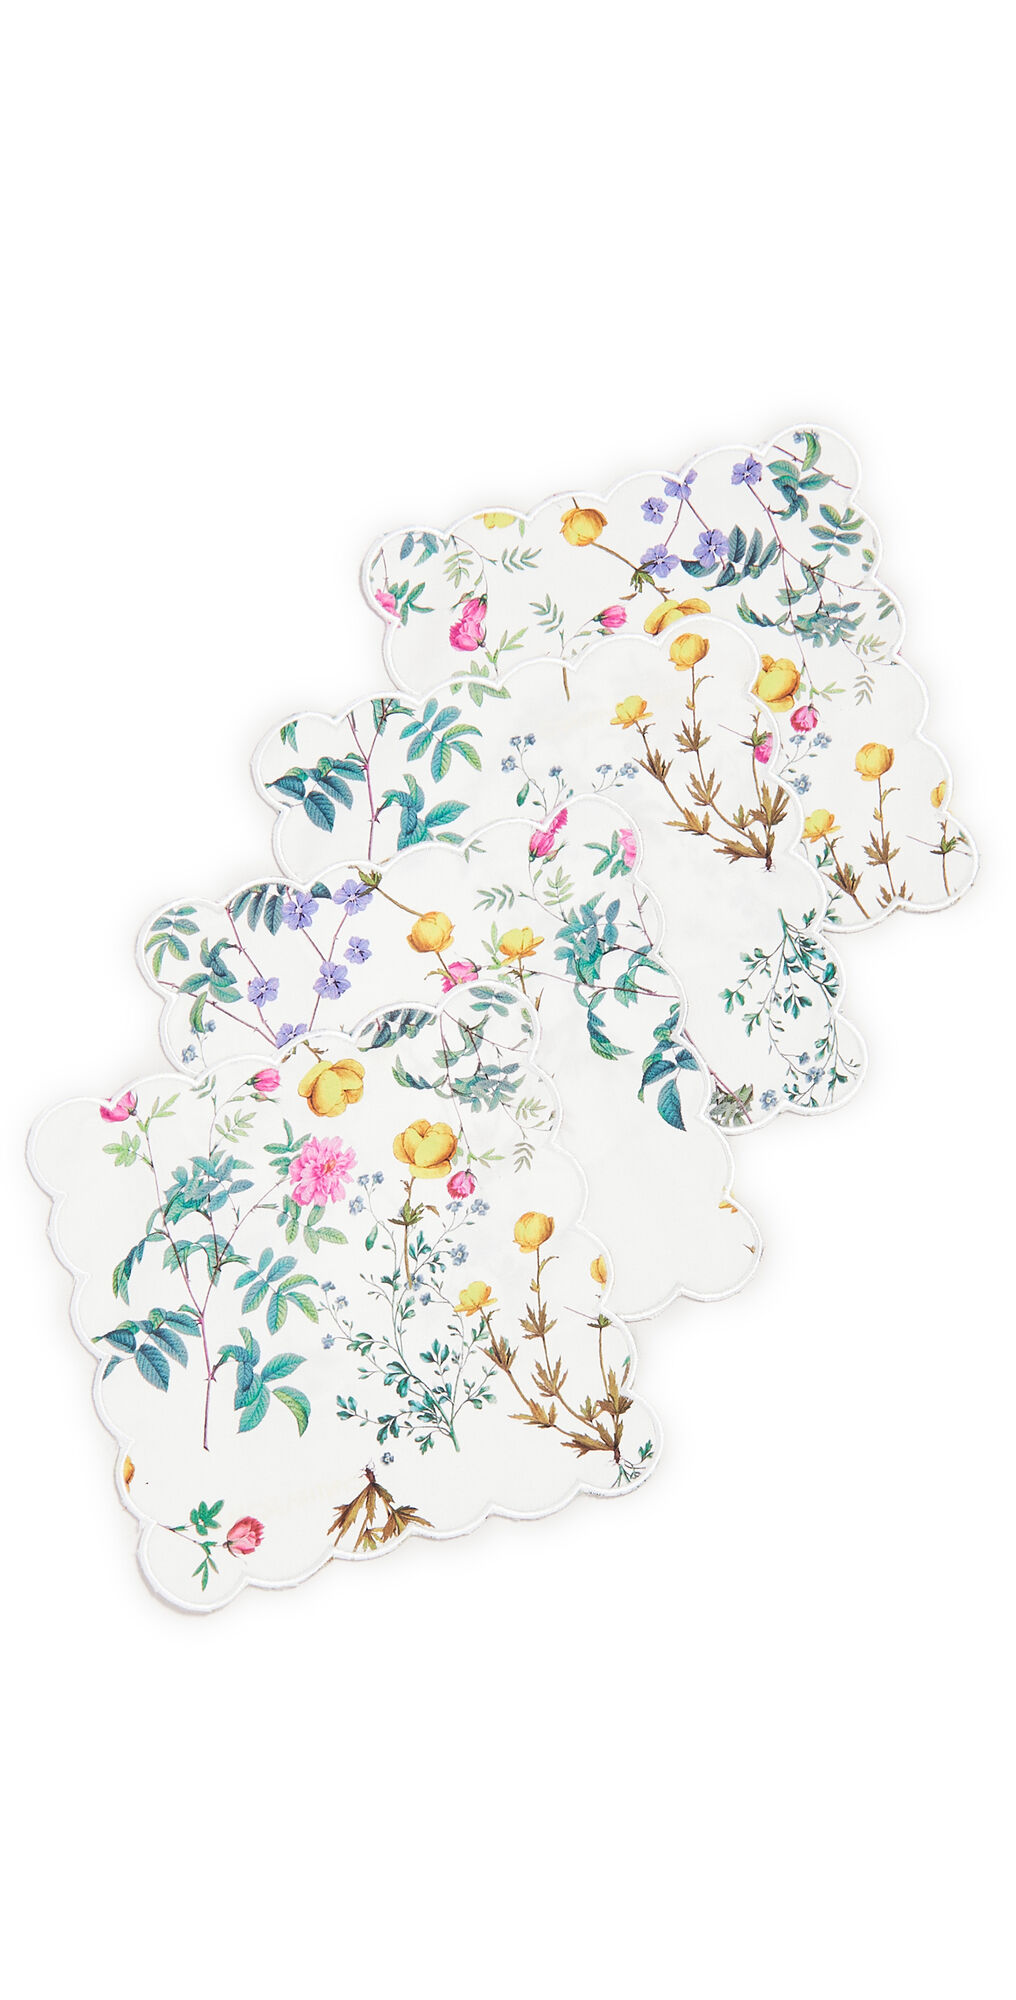 Cynthia Rowley Scallop Embroidered Edge Cocktail Napkins White Floral One Size    size: